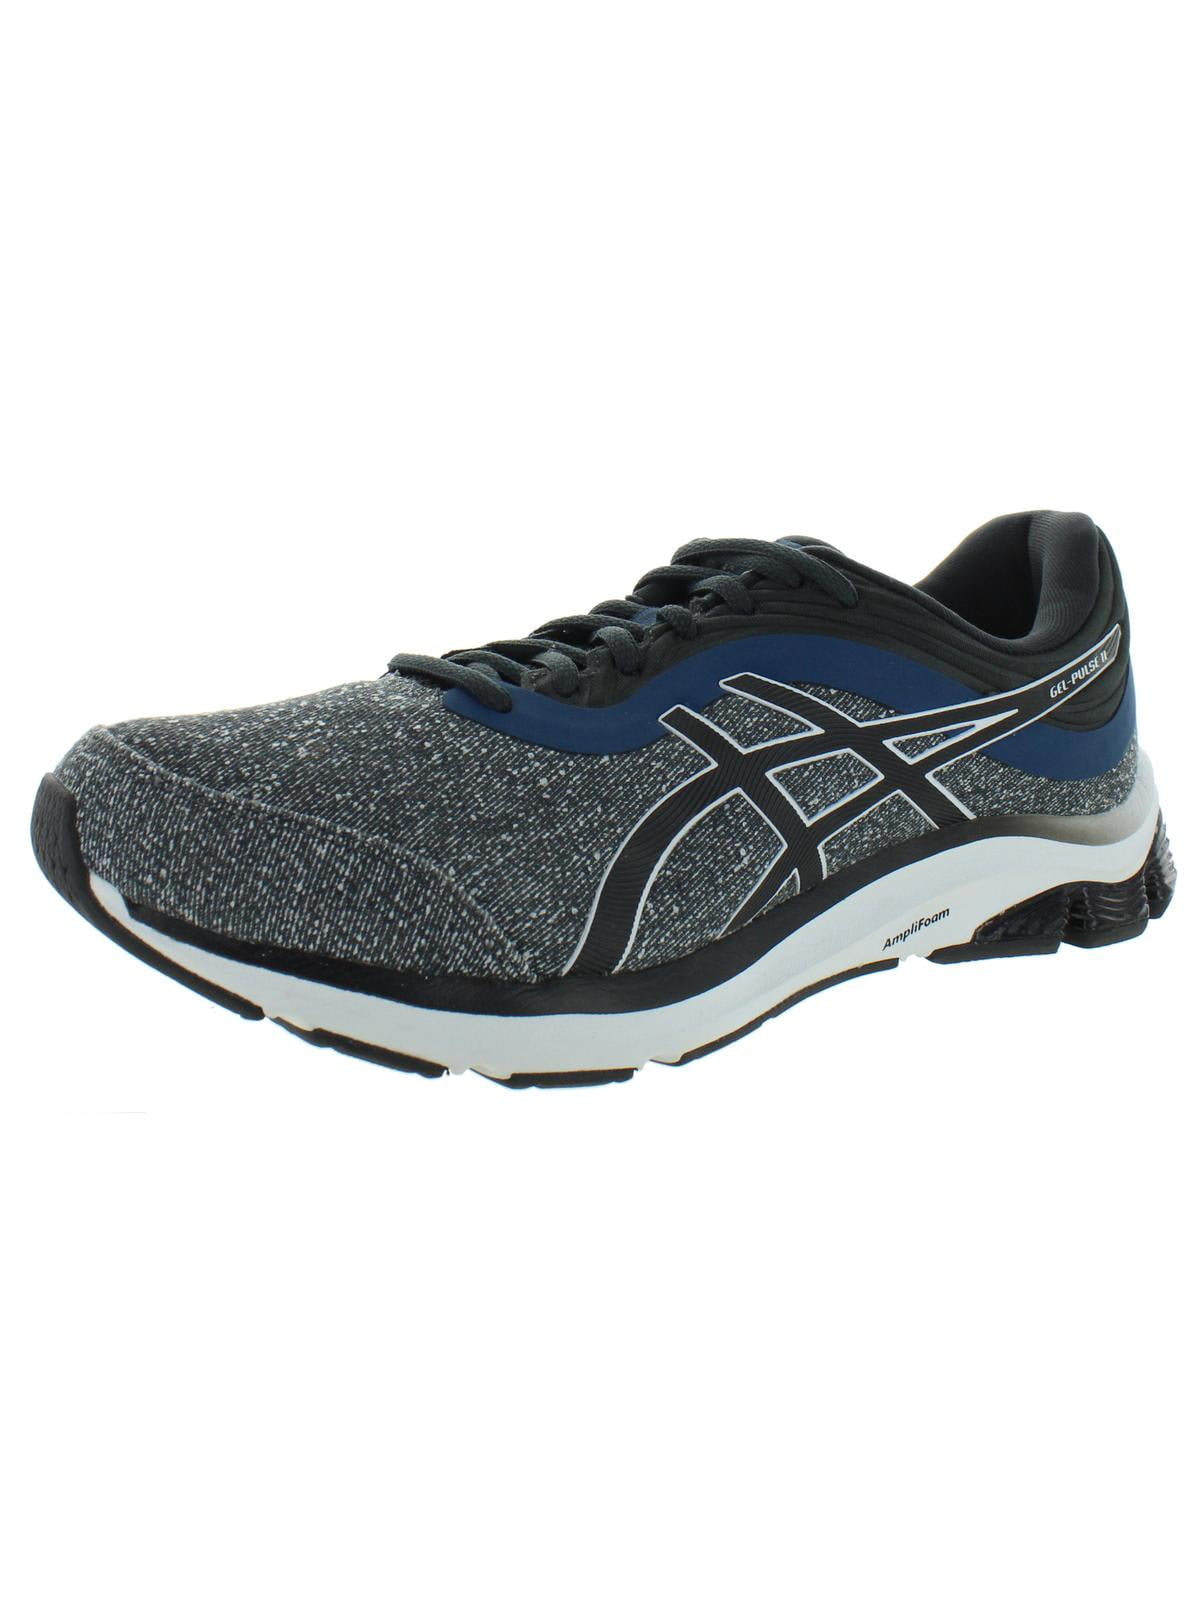 asics amplifoam running shoes,Save up to 17%,www.ilcascinone.com